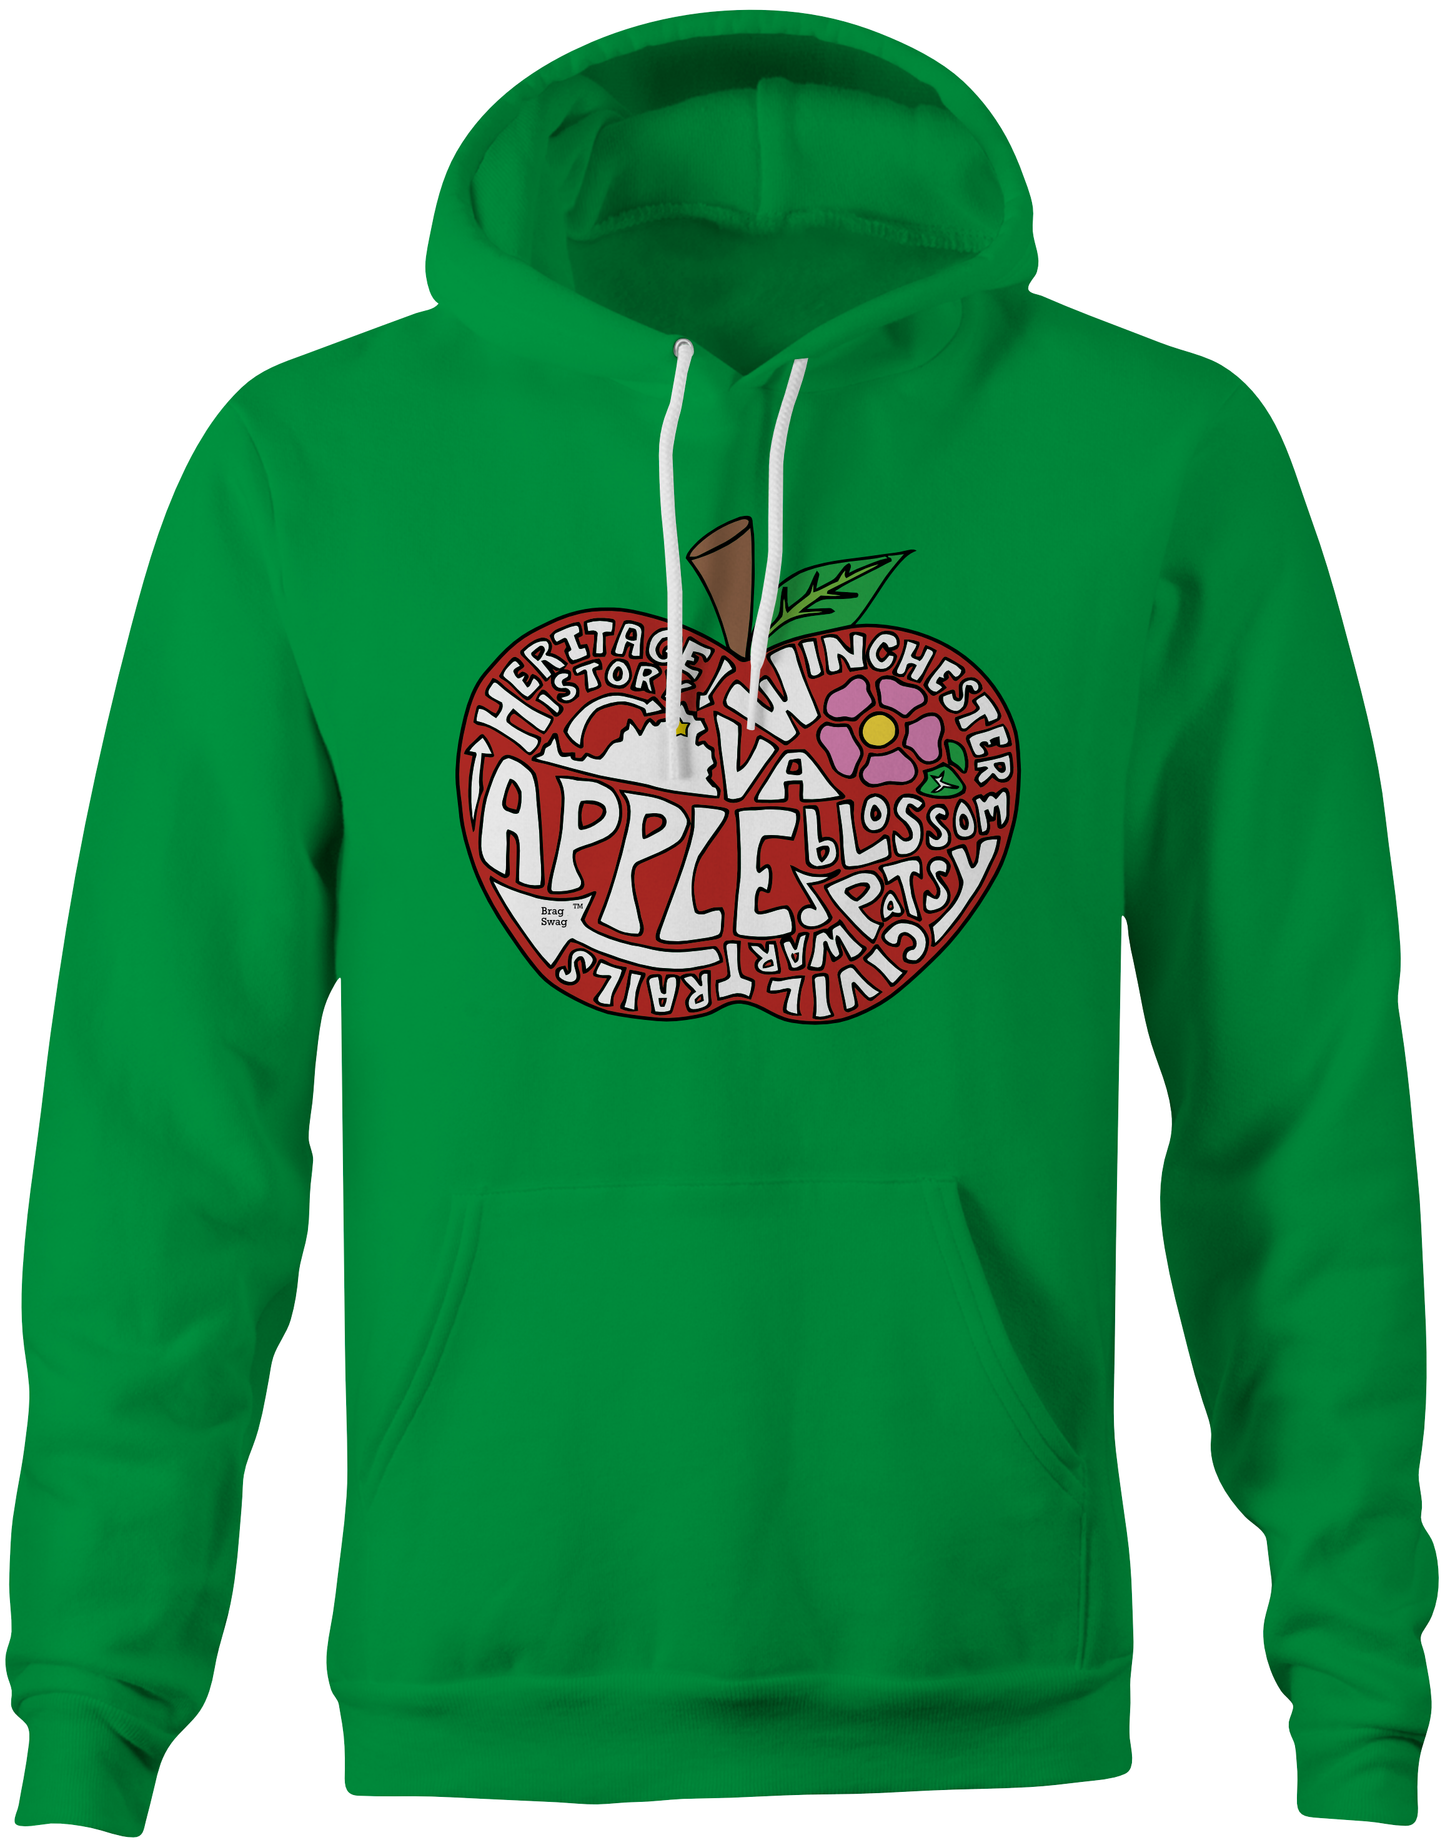 Green hoodie with a full color apple graphic containing words about Winchester Virginia